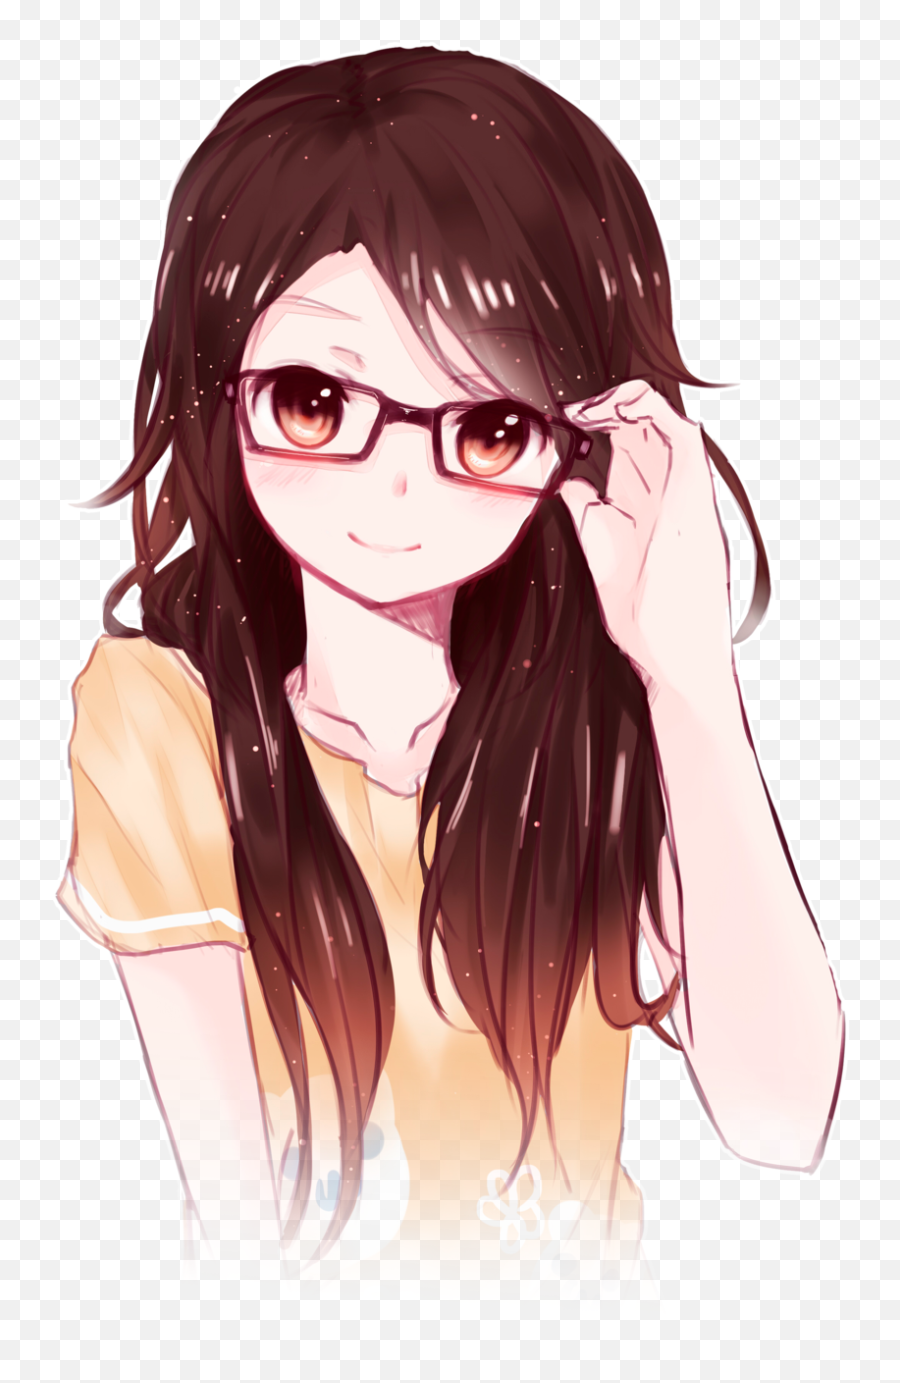 What Are The Lolis - Brunette Anime Girl With Glasses Png,Loli Png.